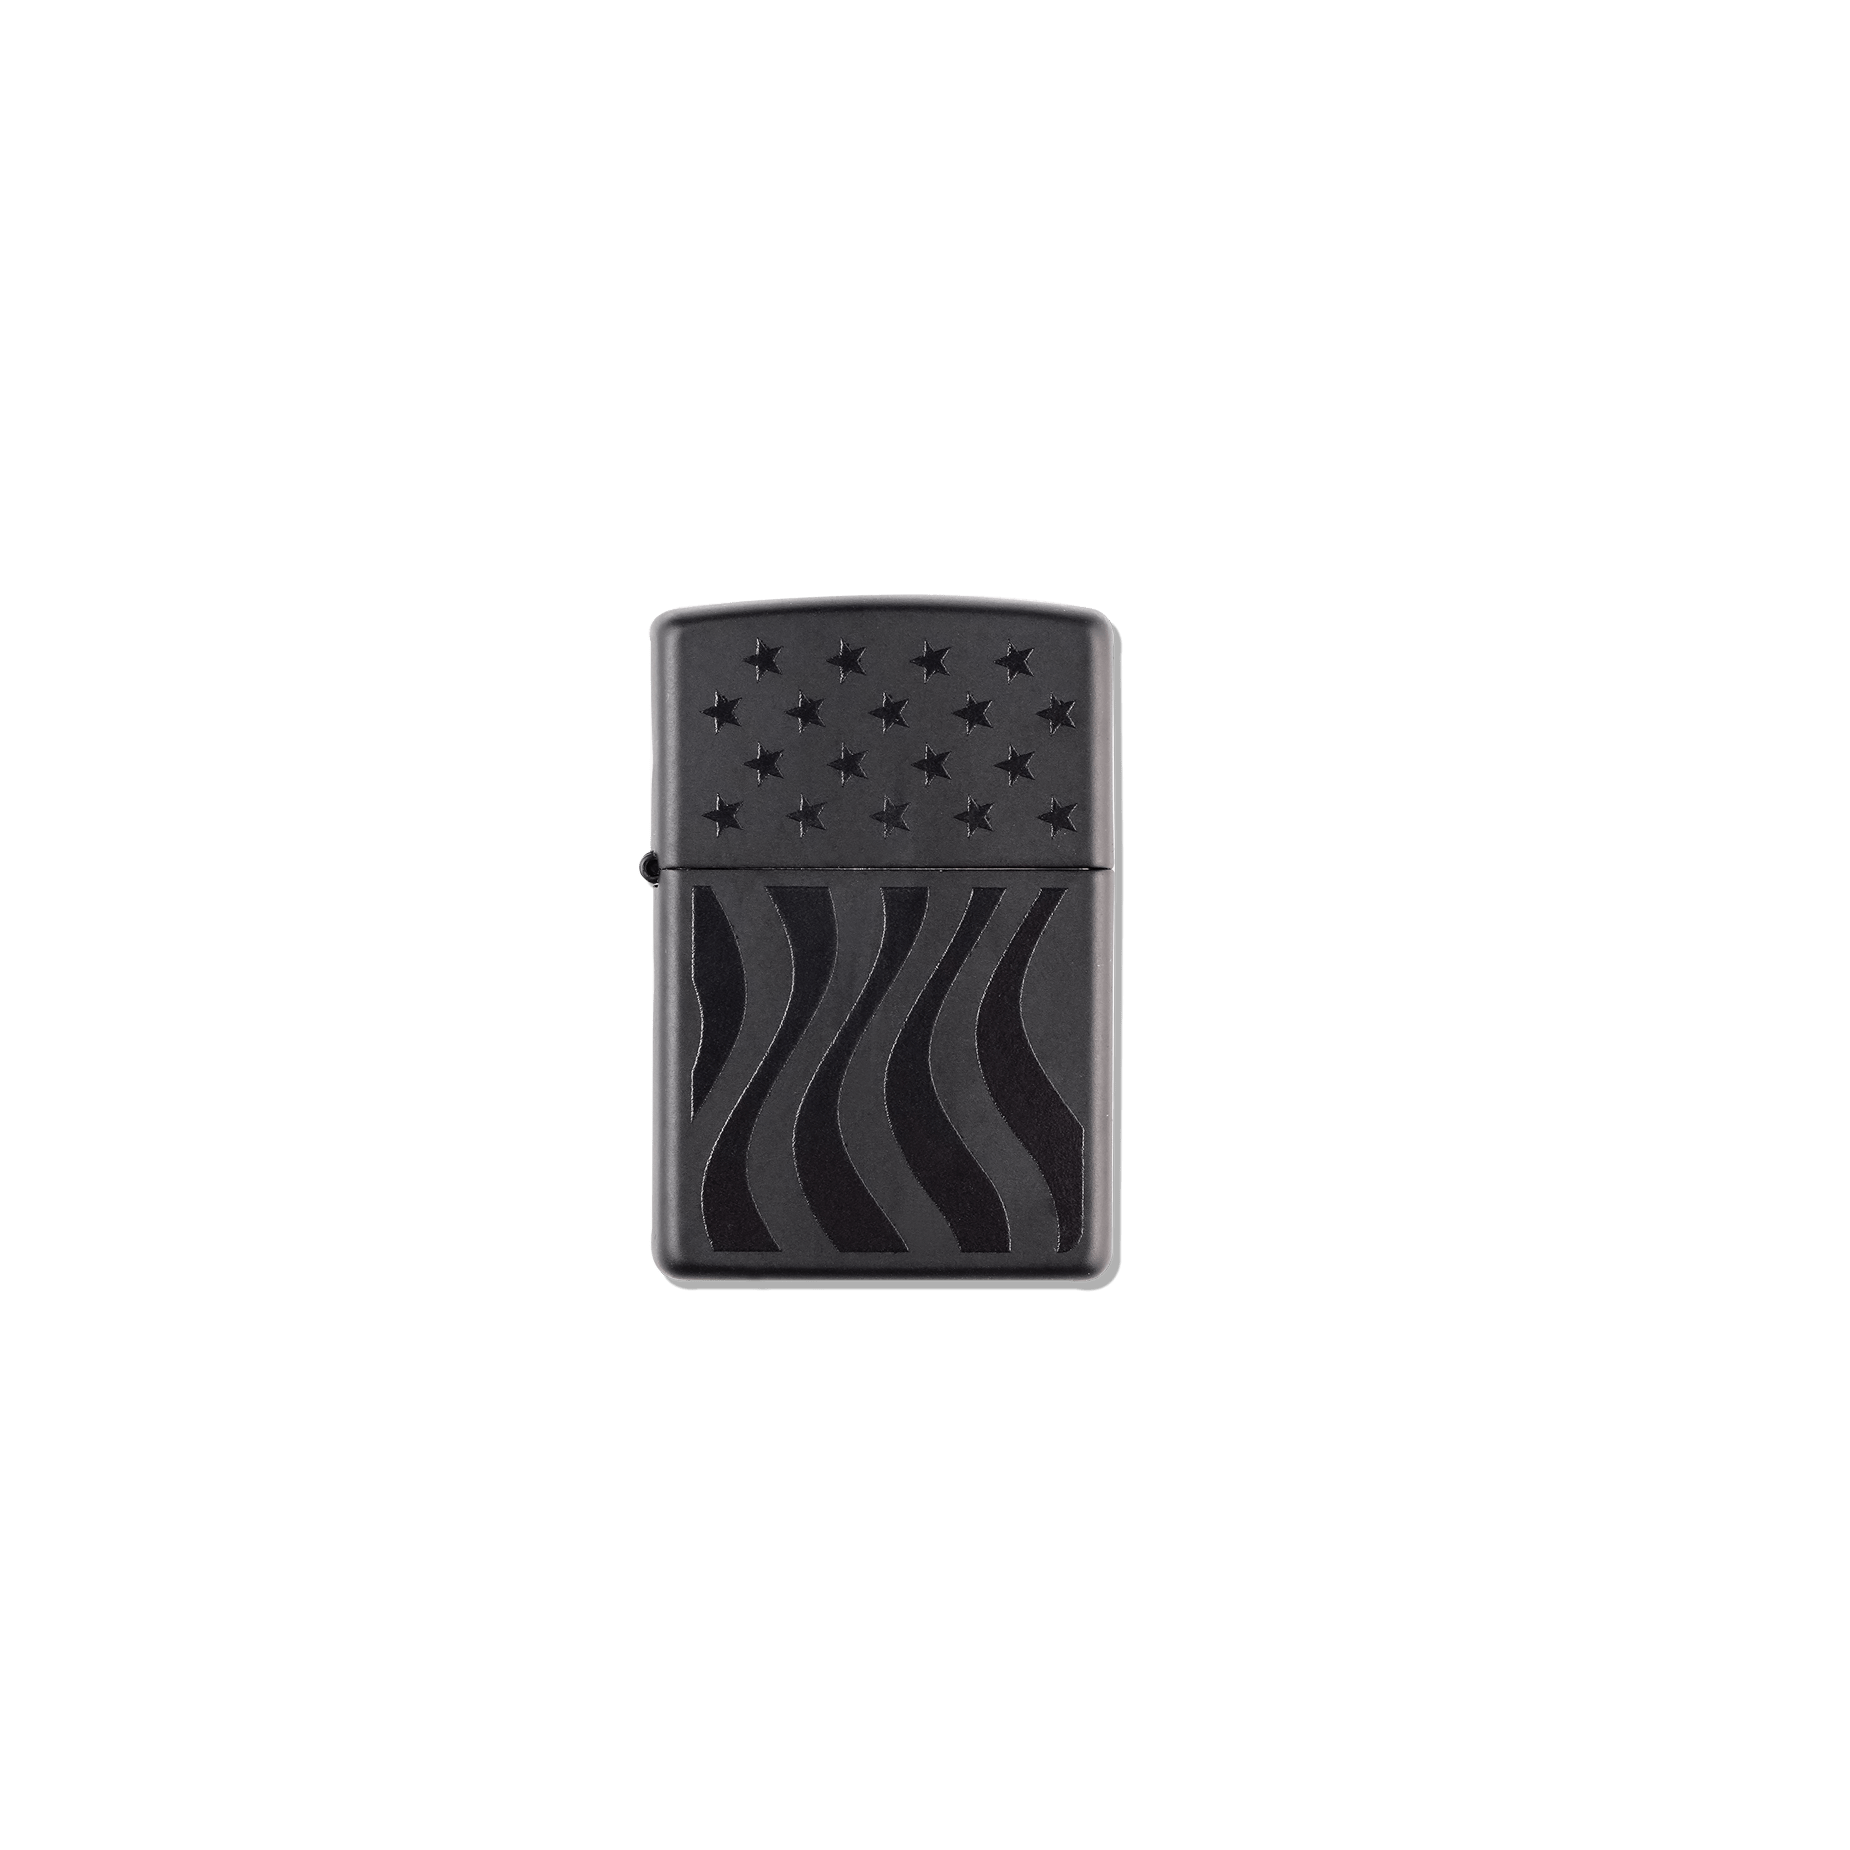 Zippo’s Classic Matte Black Lighter with Flag Design - Men's Gifts - Manly Bands